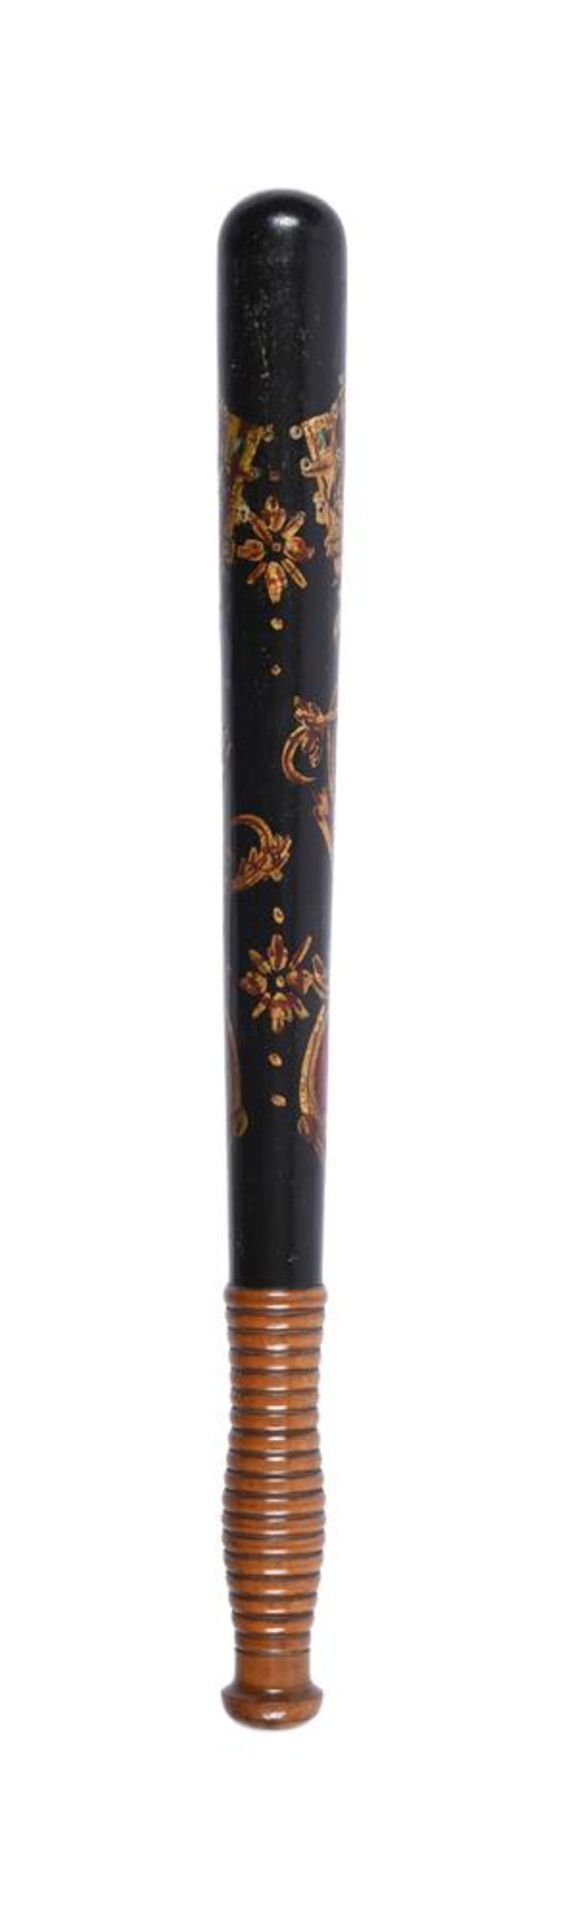 A VICTORIAN HEBBERT AND CO PAINTED WOOD PROVOST'S TRUNCHEON - Image 2 of 3